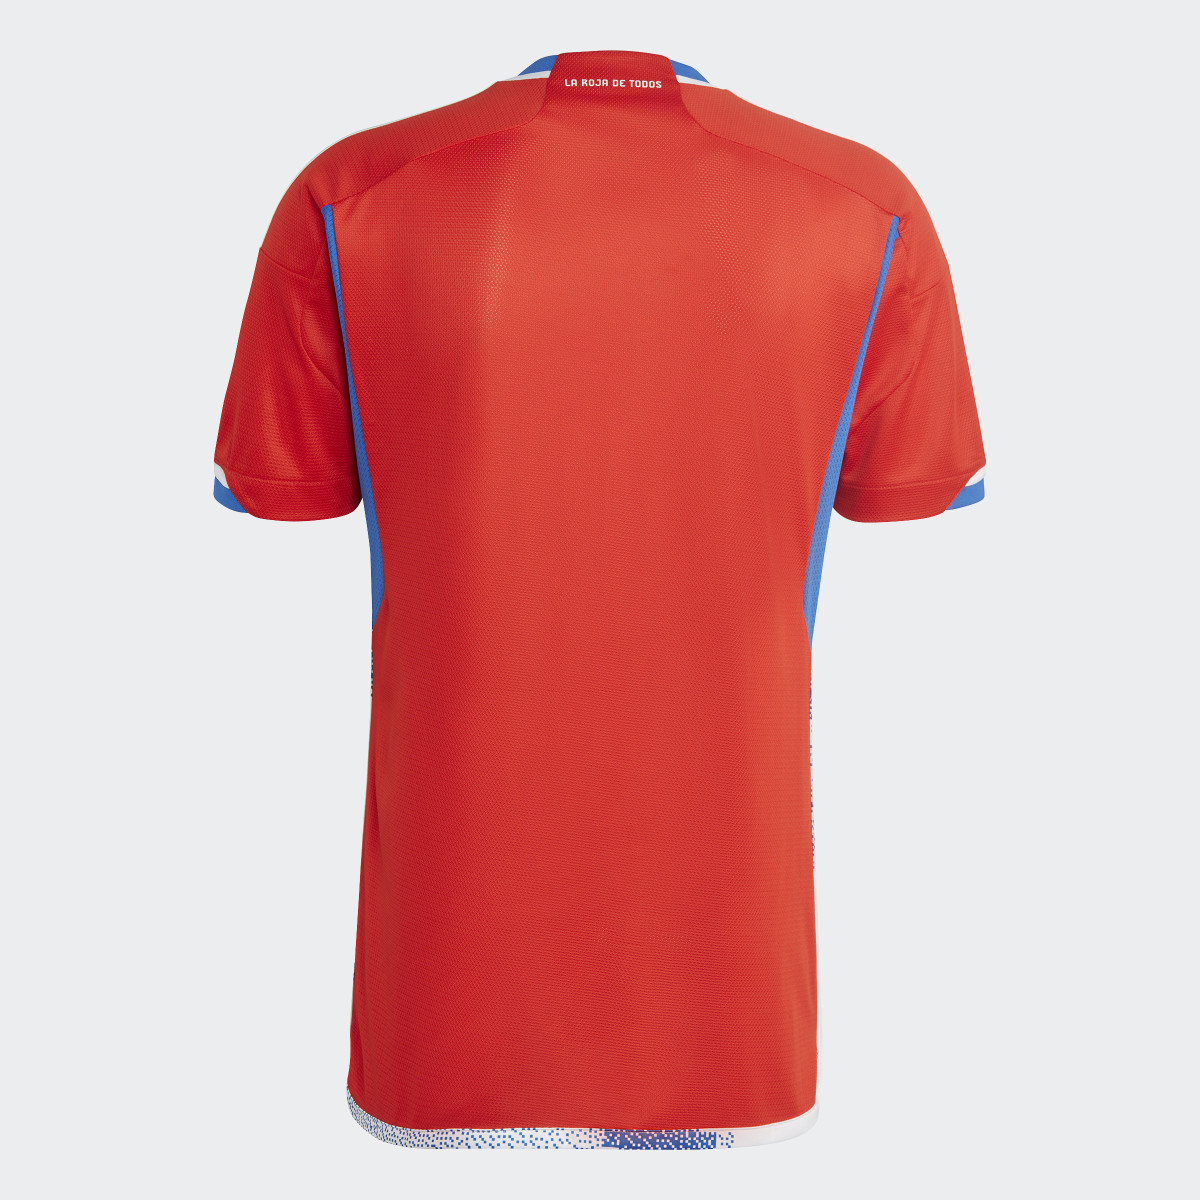 Adidas Chile 22 Home Jersey. 6